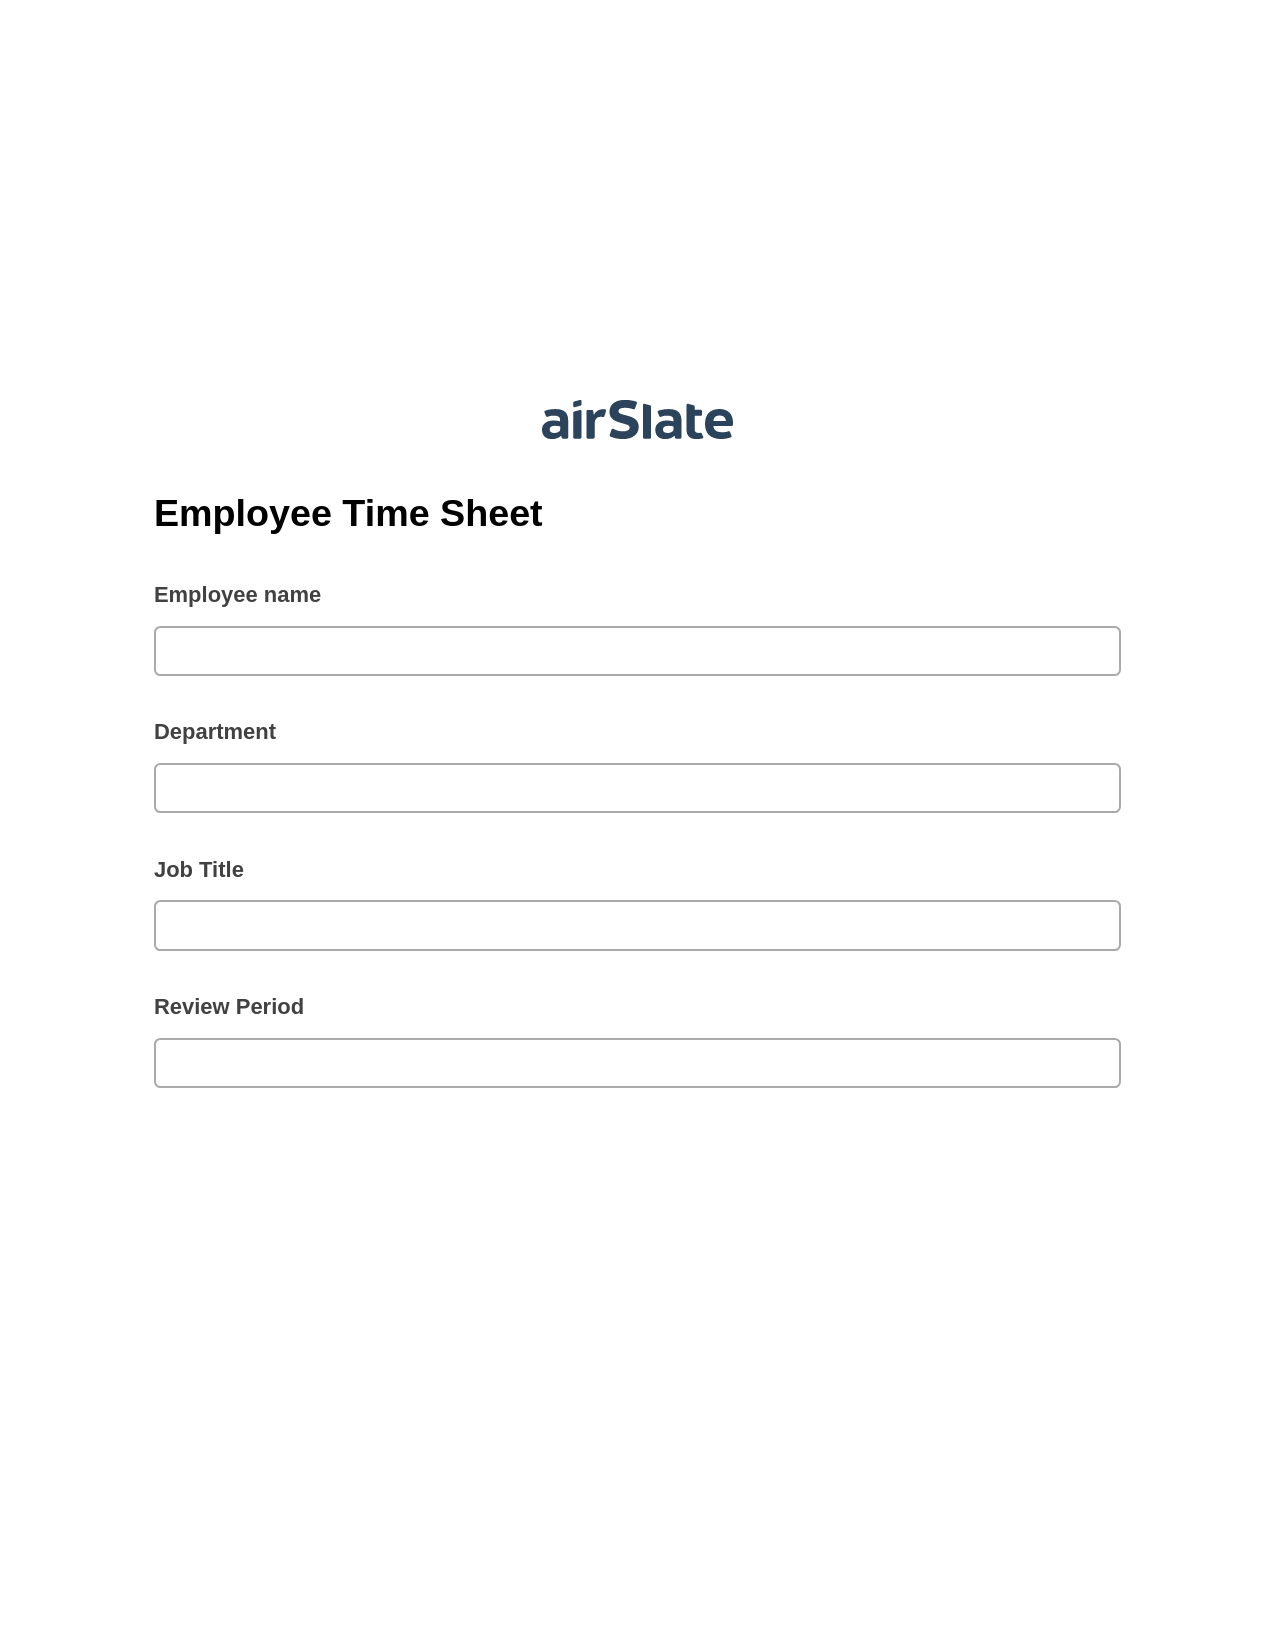 Employee Time Sheet Pre-fill from MS Dynamics 365 Records, Create Salesforce Records Bot, Export to MySQL Bot